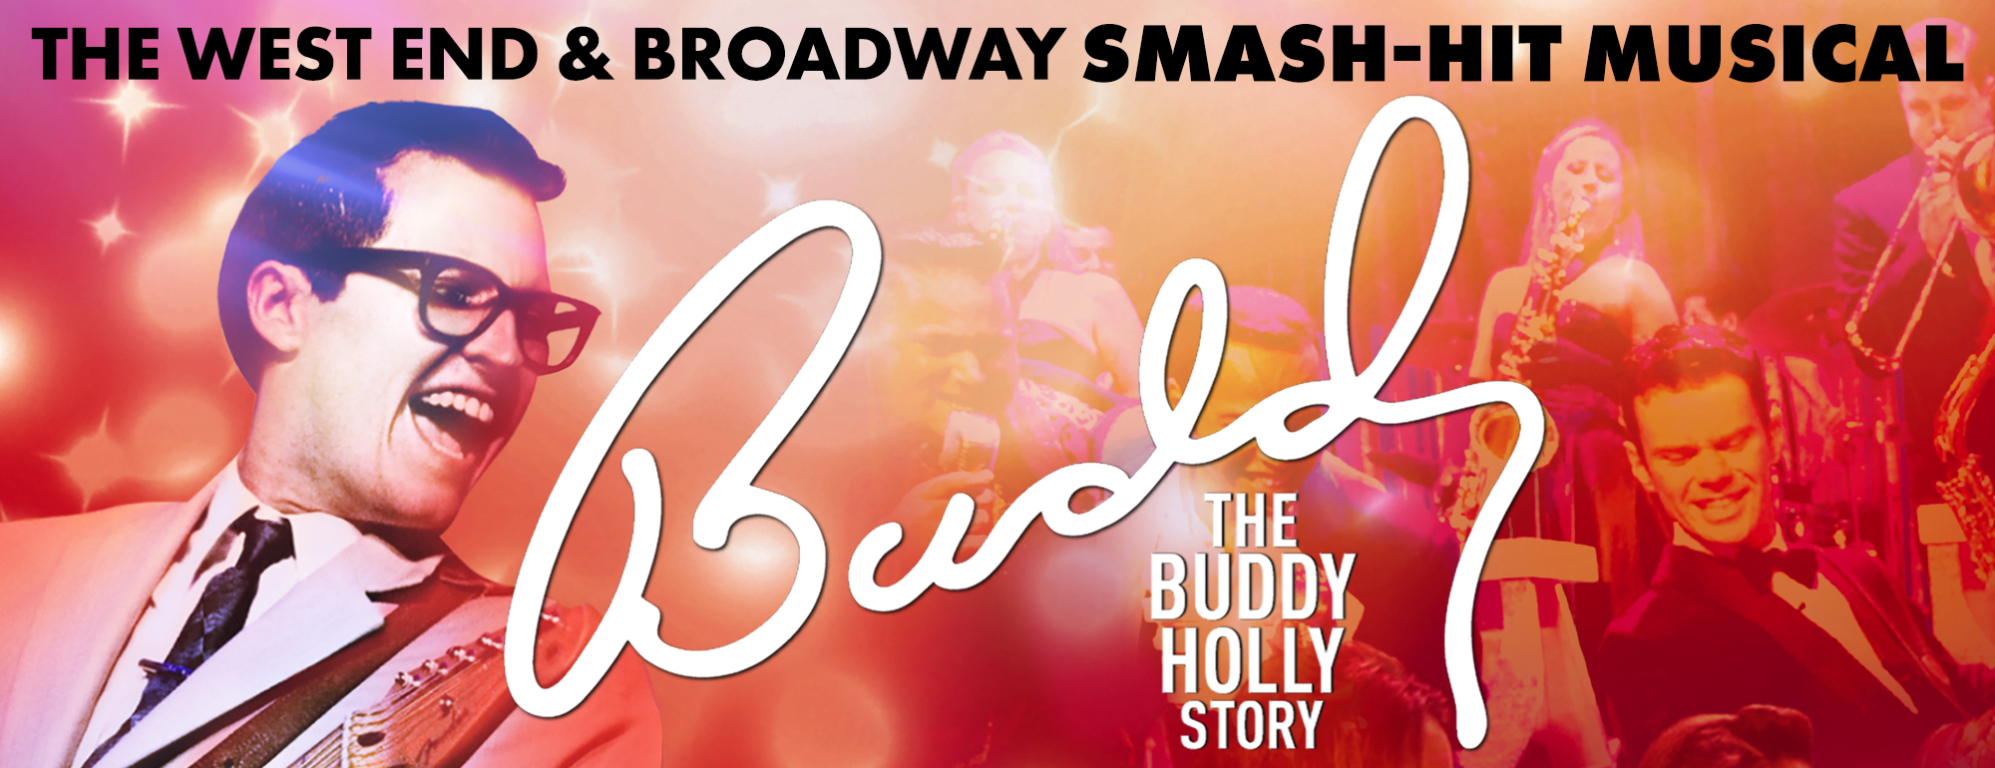 Buddy The Buddy Holly Story Theatre Royal Plymouth